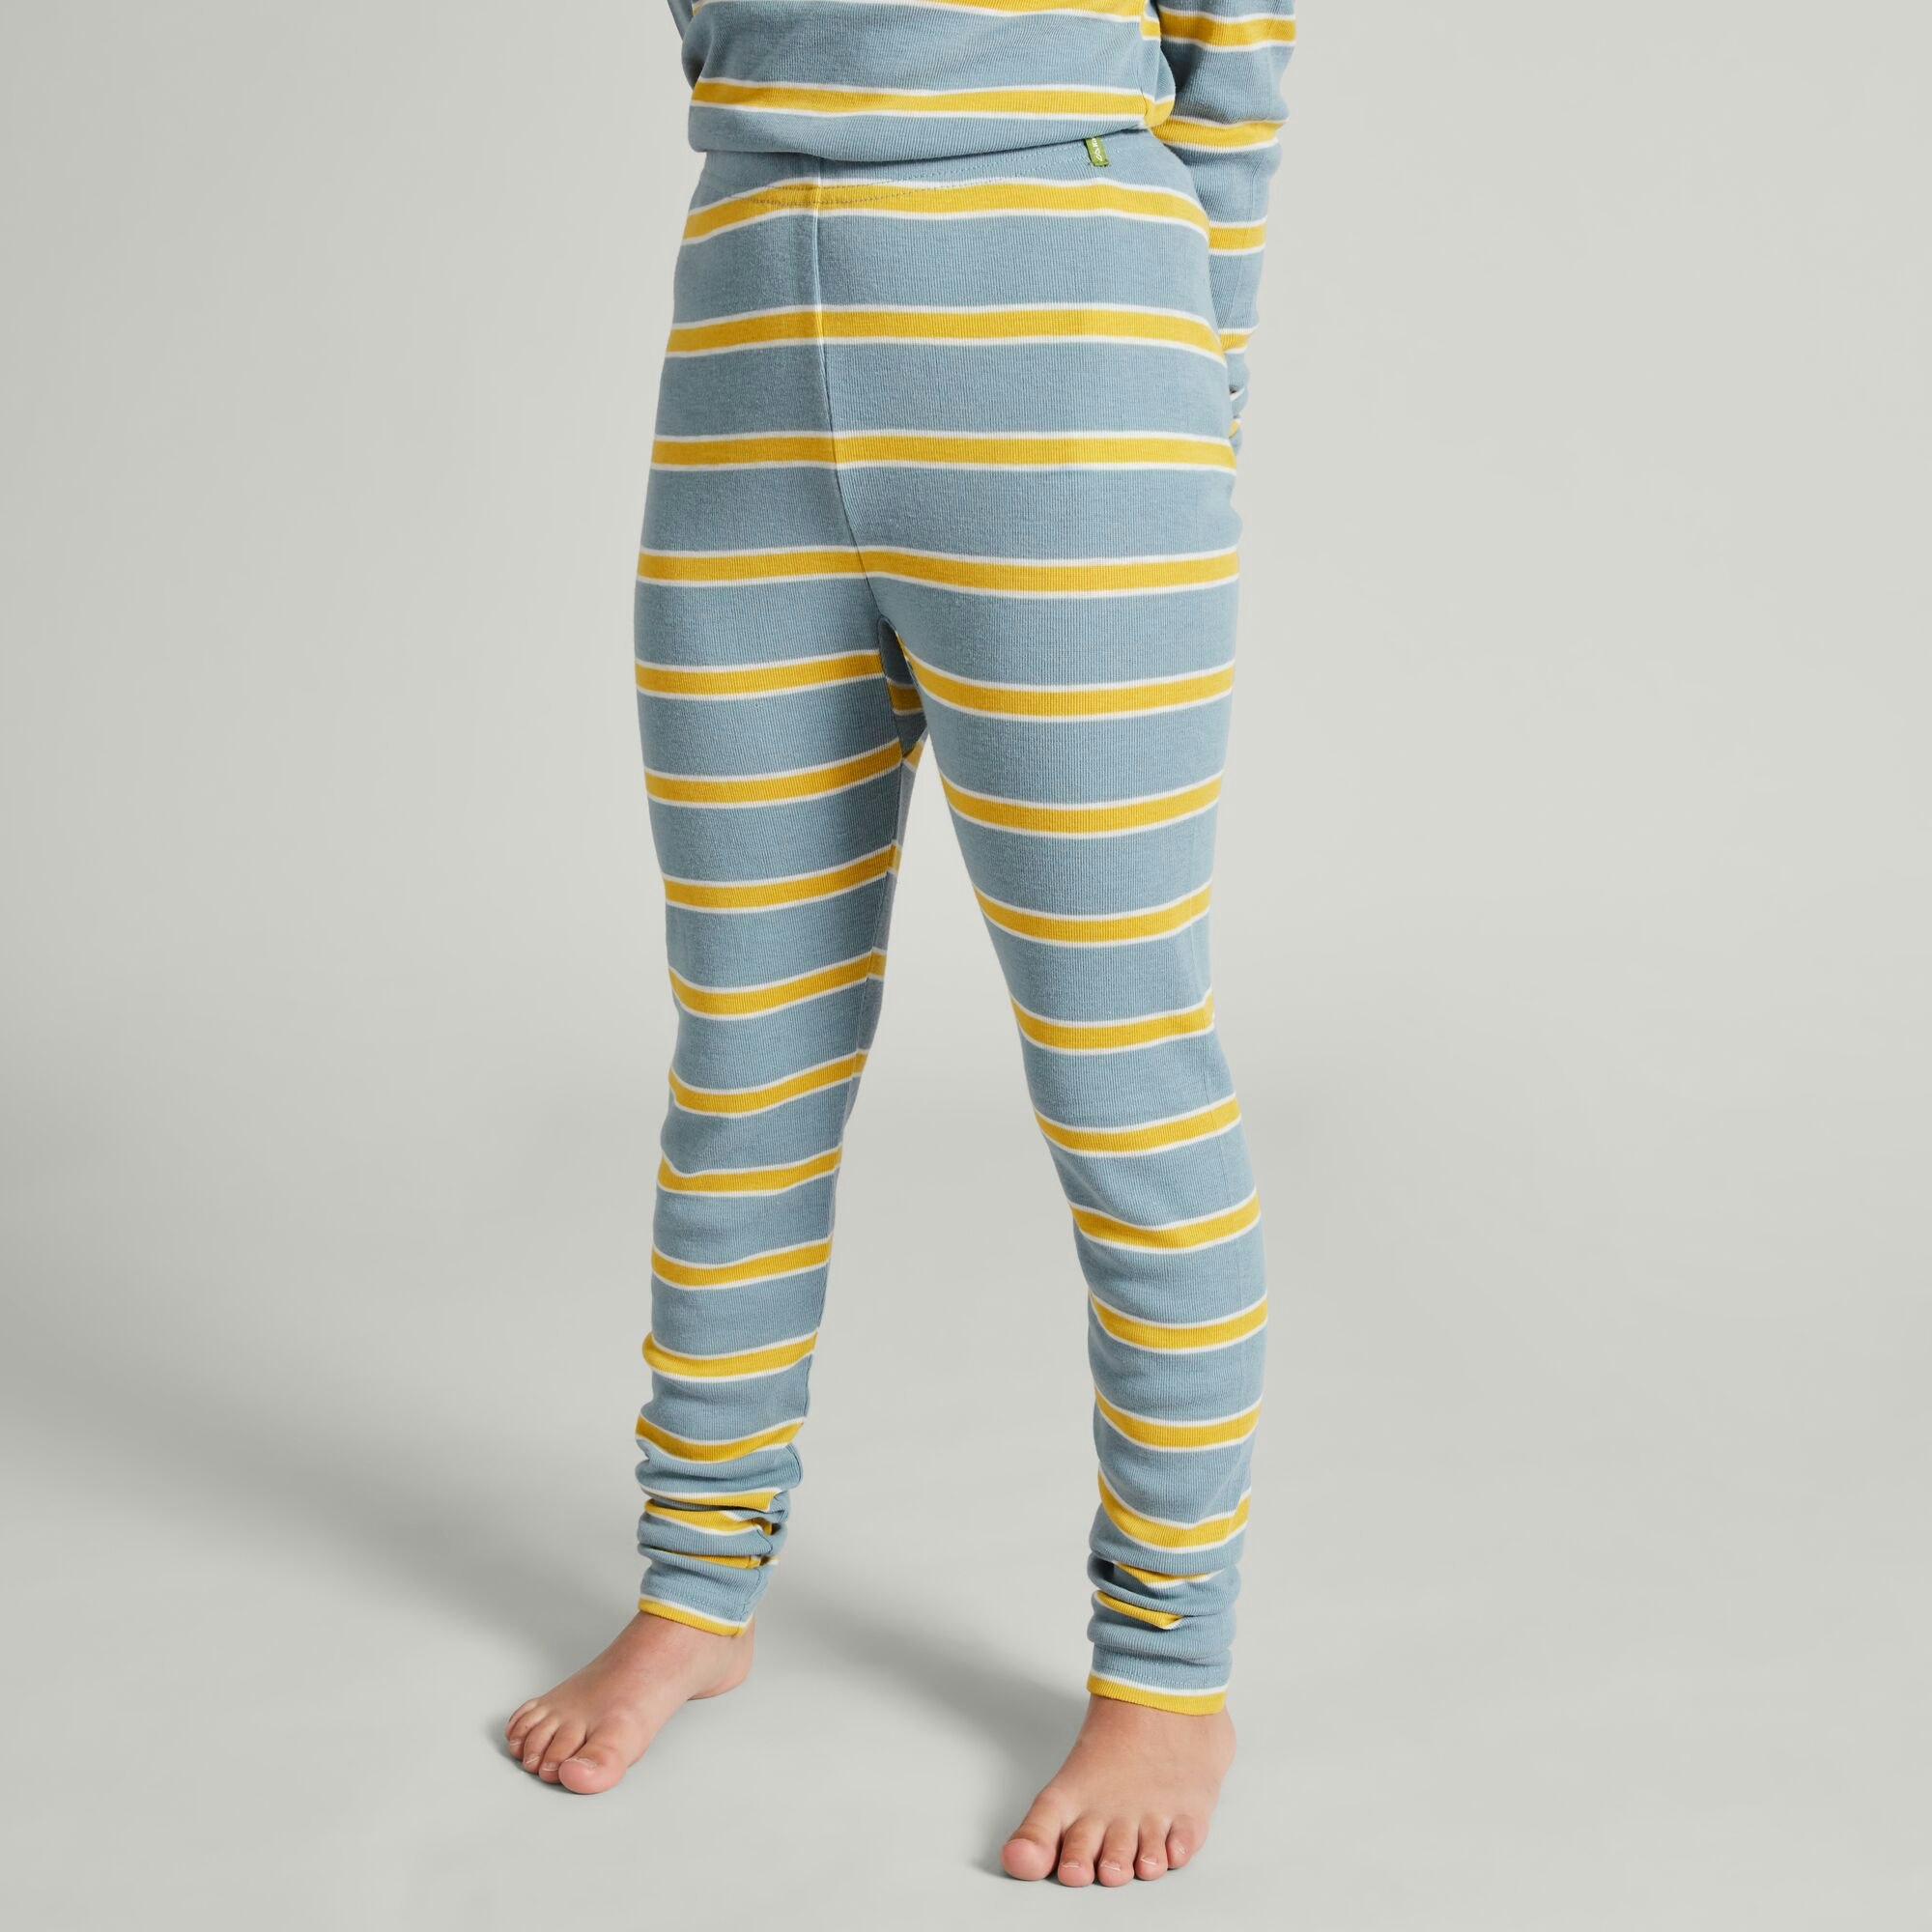 Best kids' thermals and base layers 2020